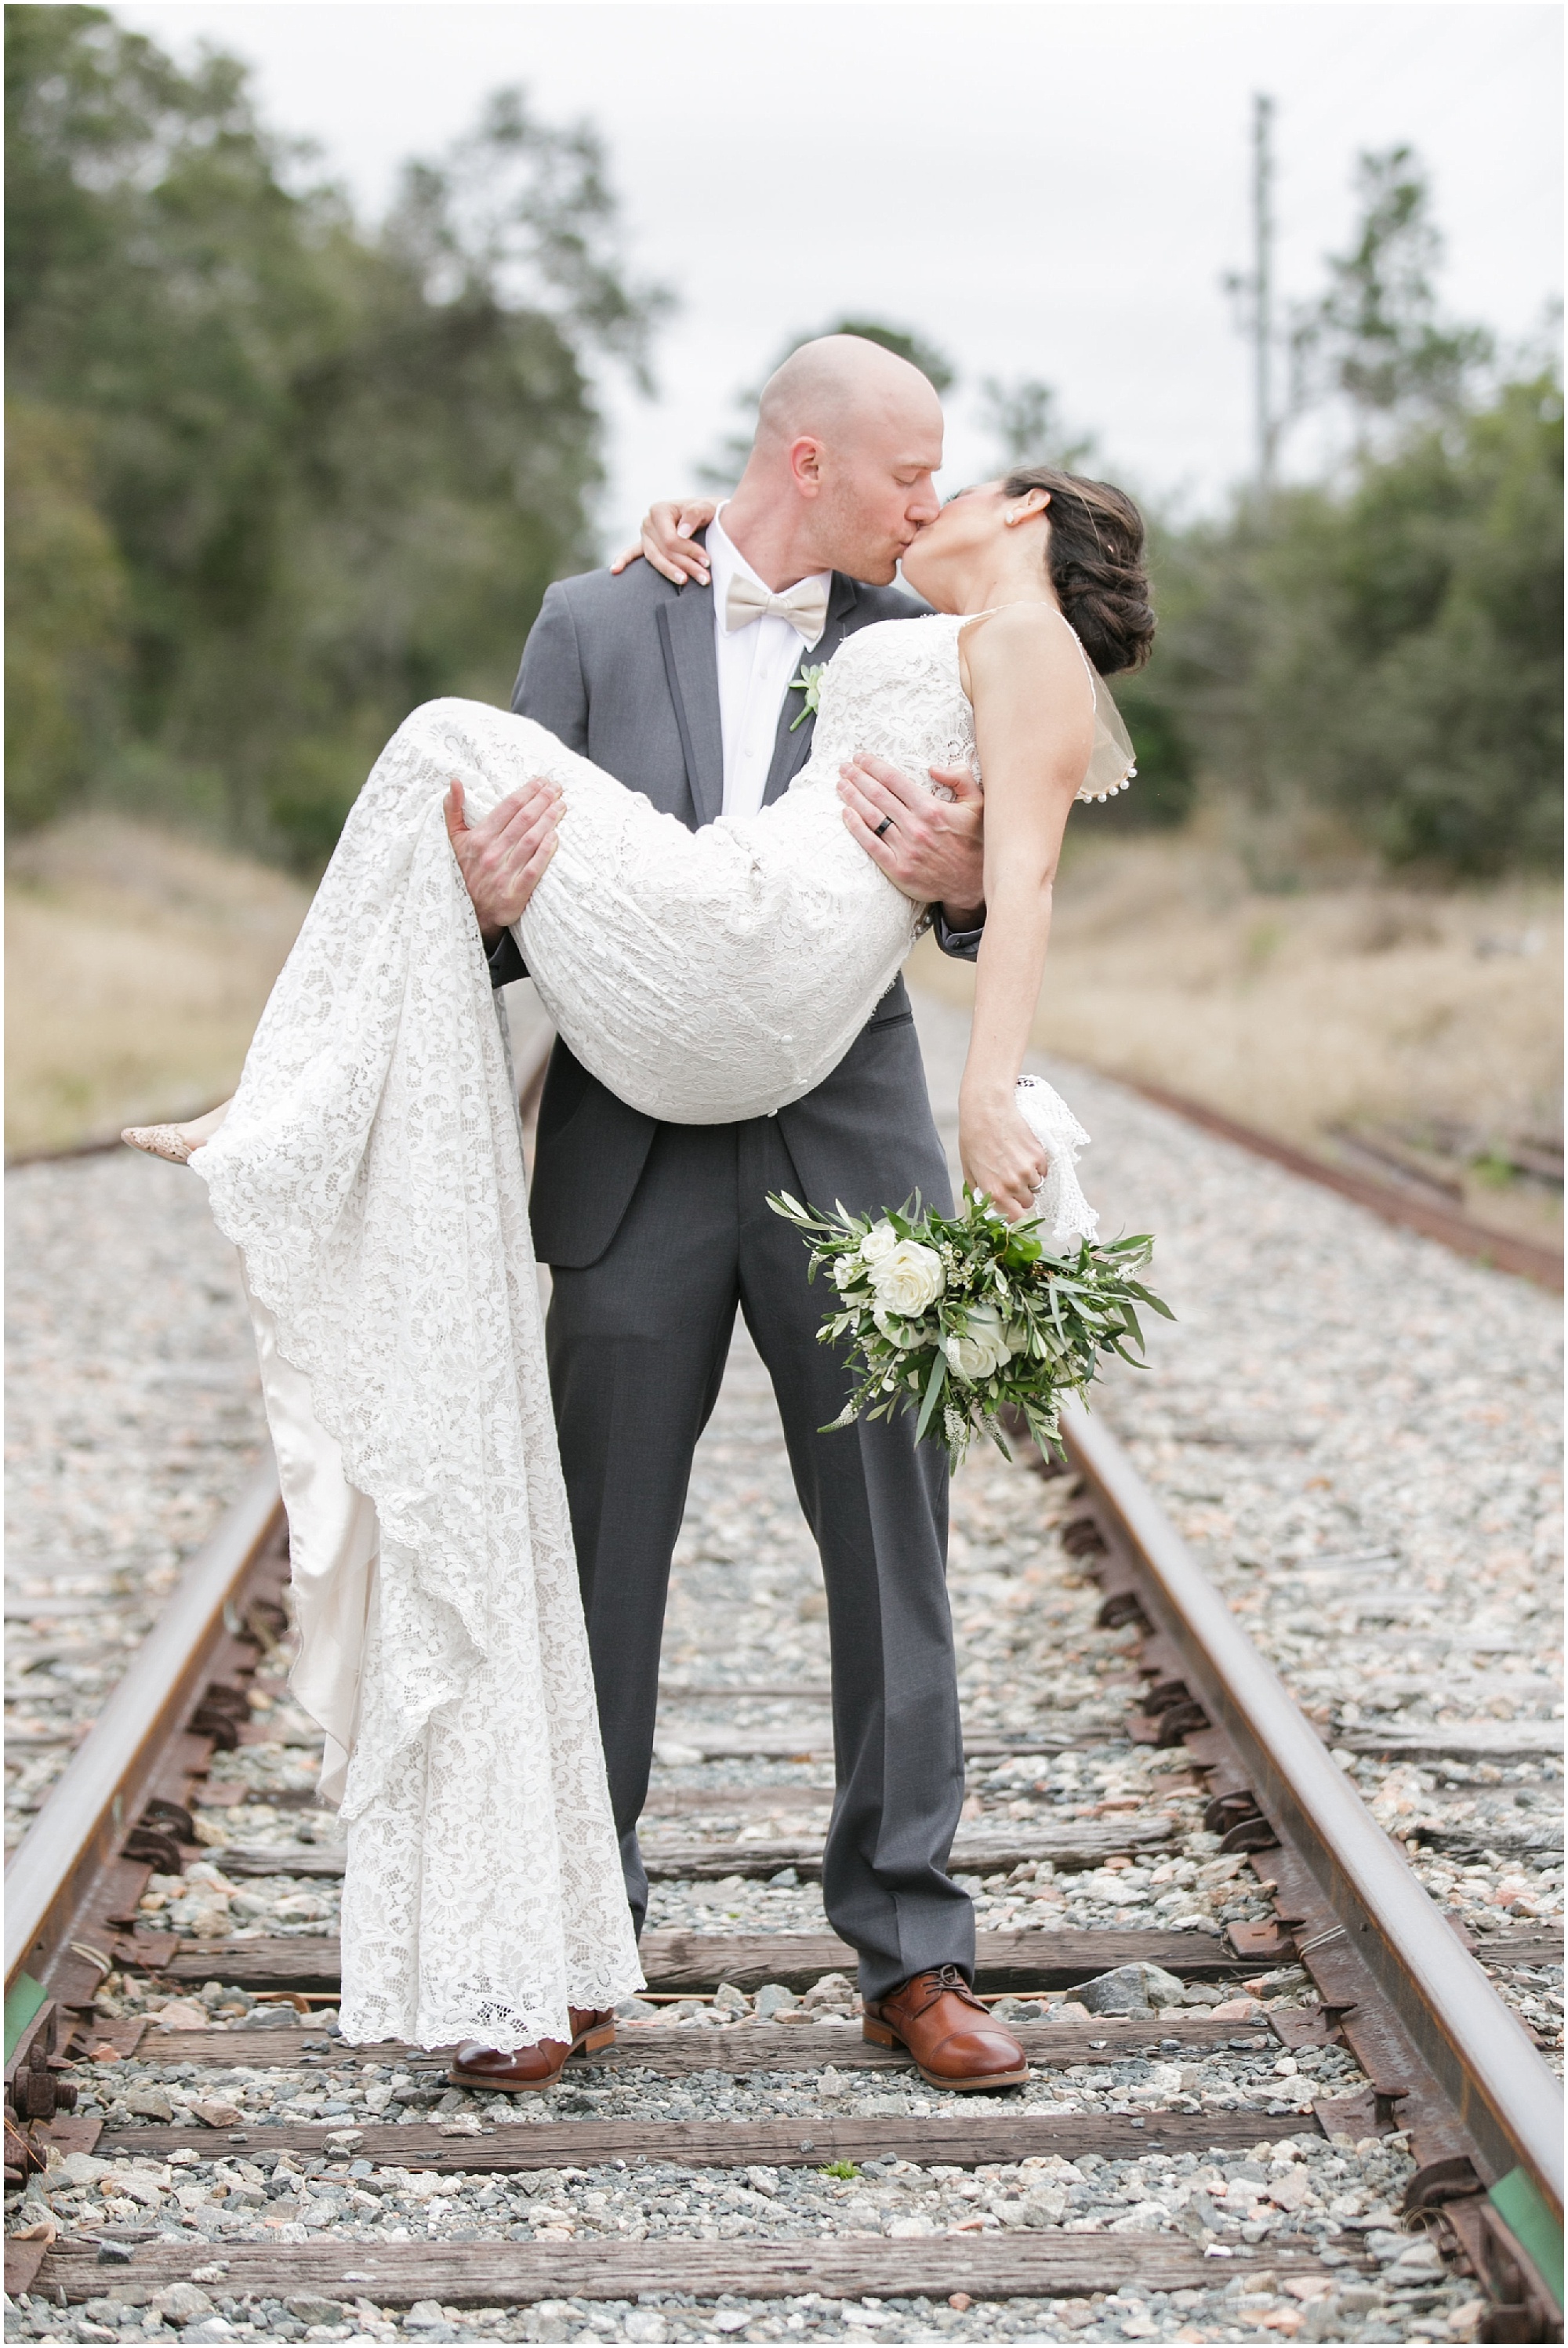 Groom kisses his bride while lifting her in his arms.